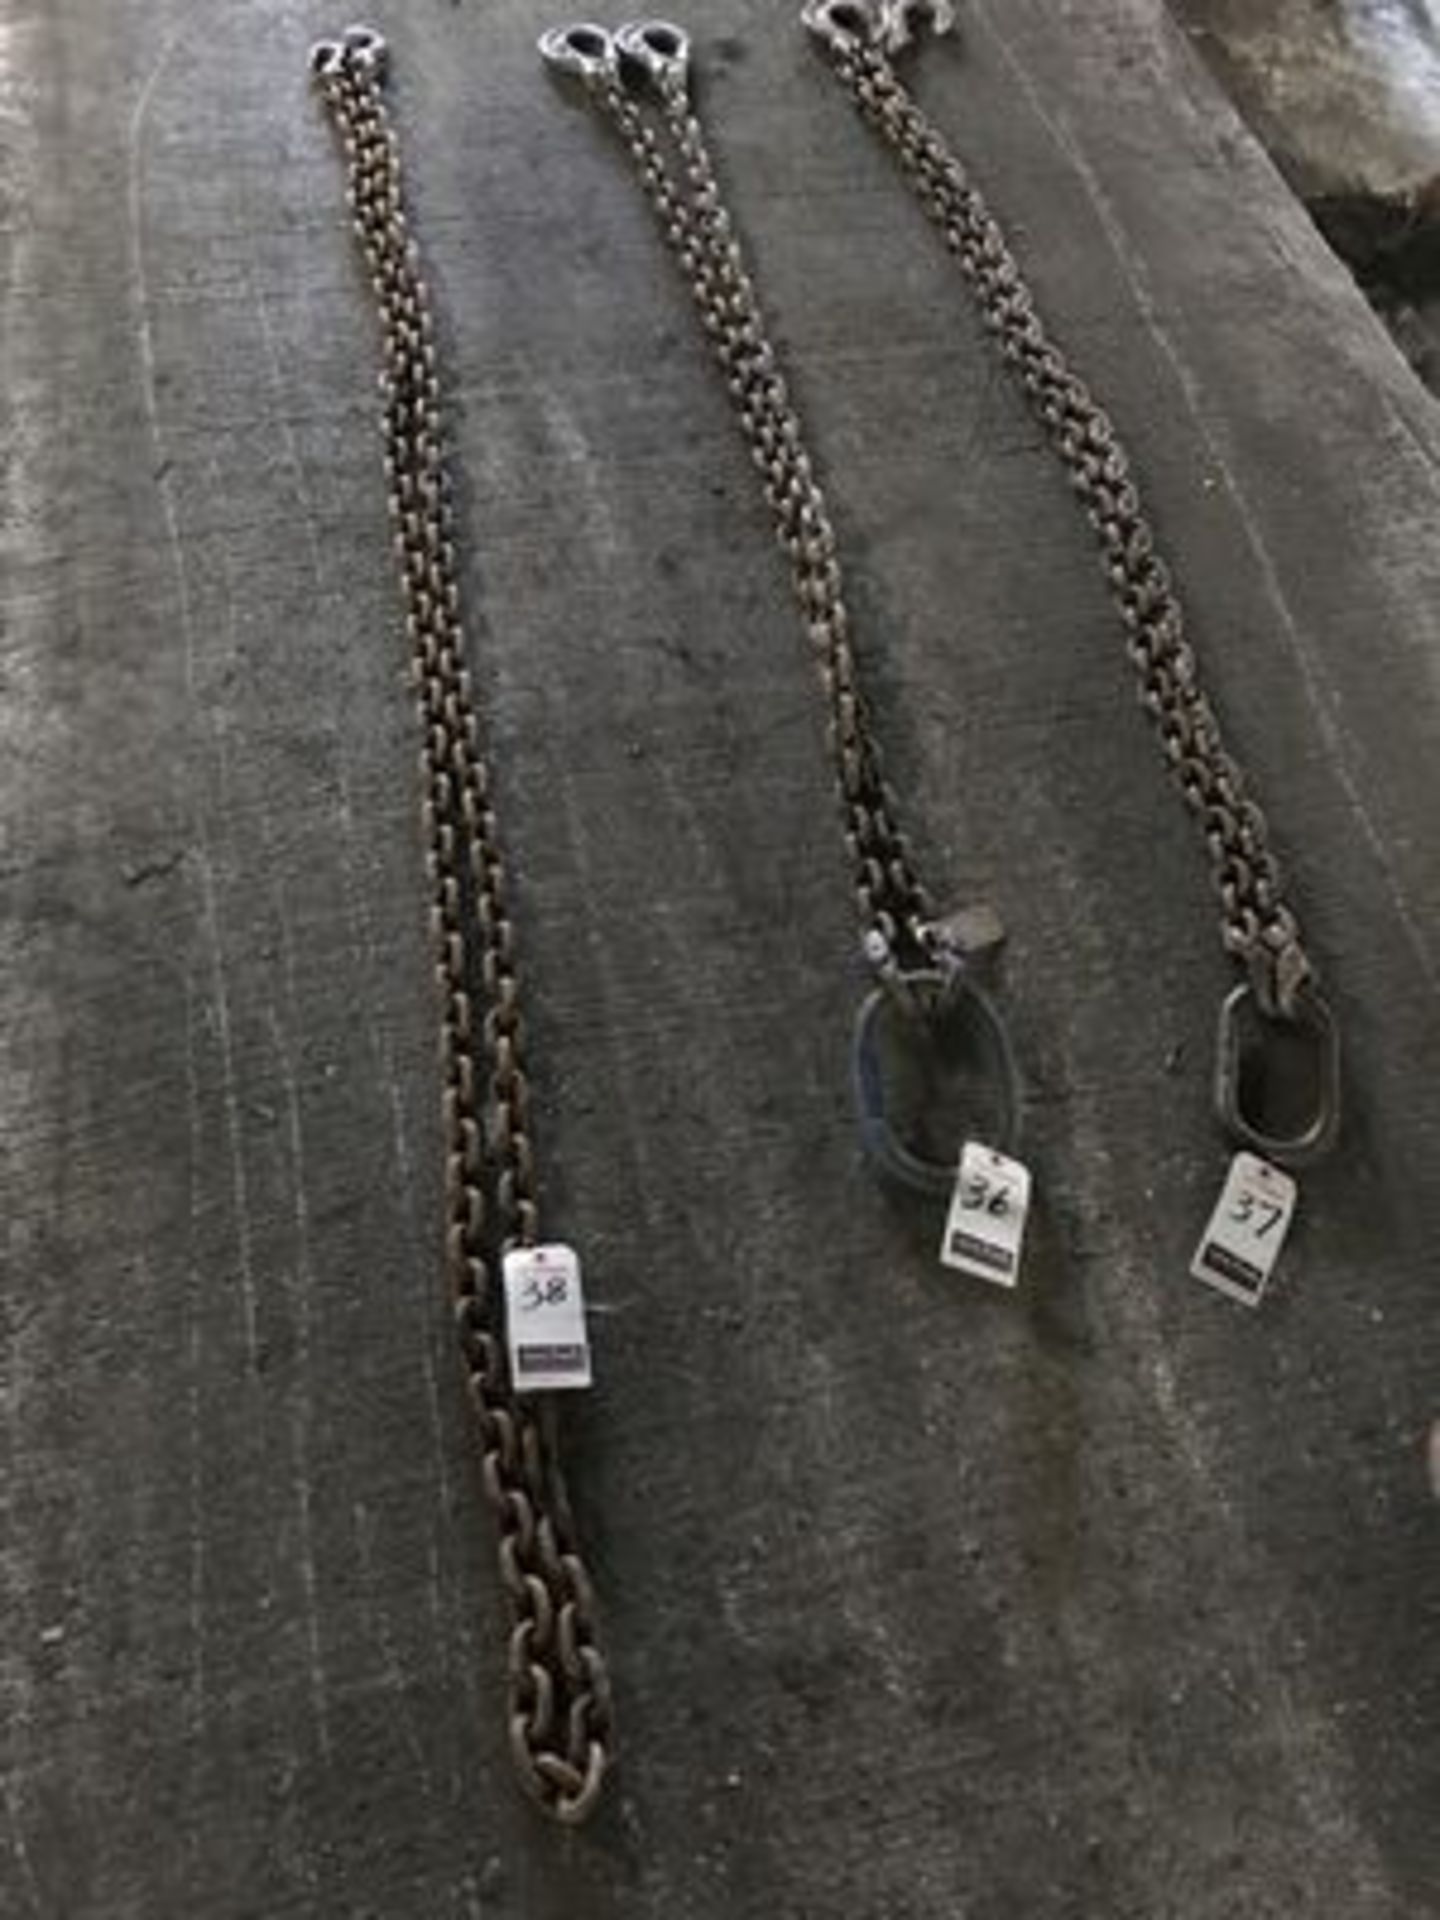 5' H.D. DOUBLE STEEL TOW CHAIN